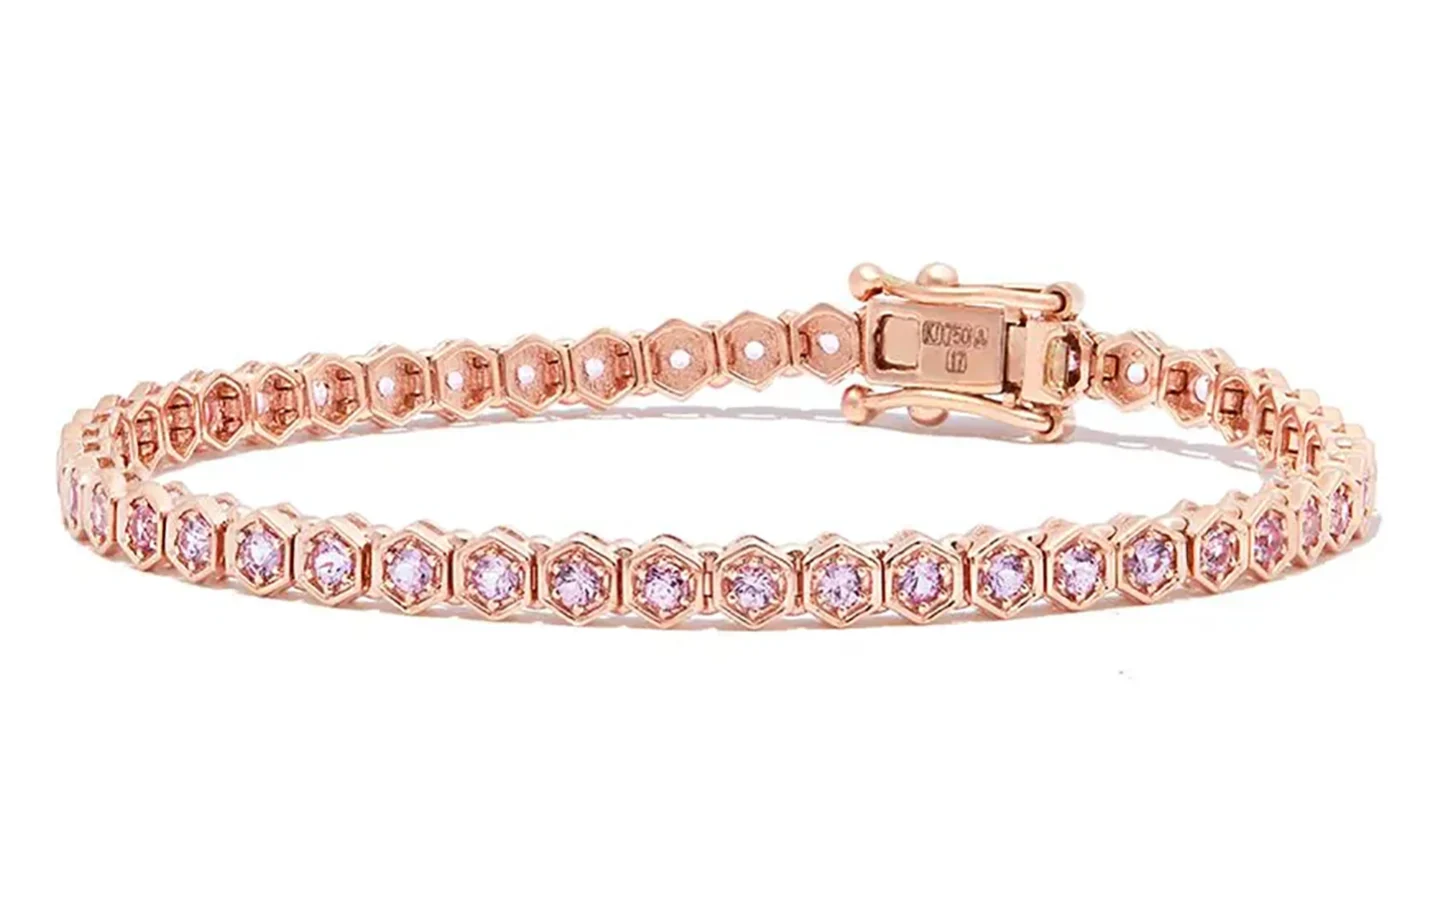 The Quiet Luxury Tennis Bracelets Loved By The Fashion Set